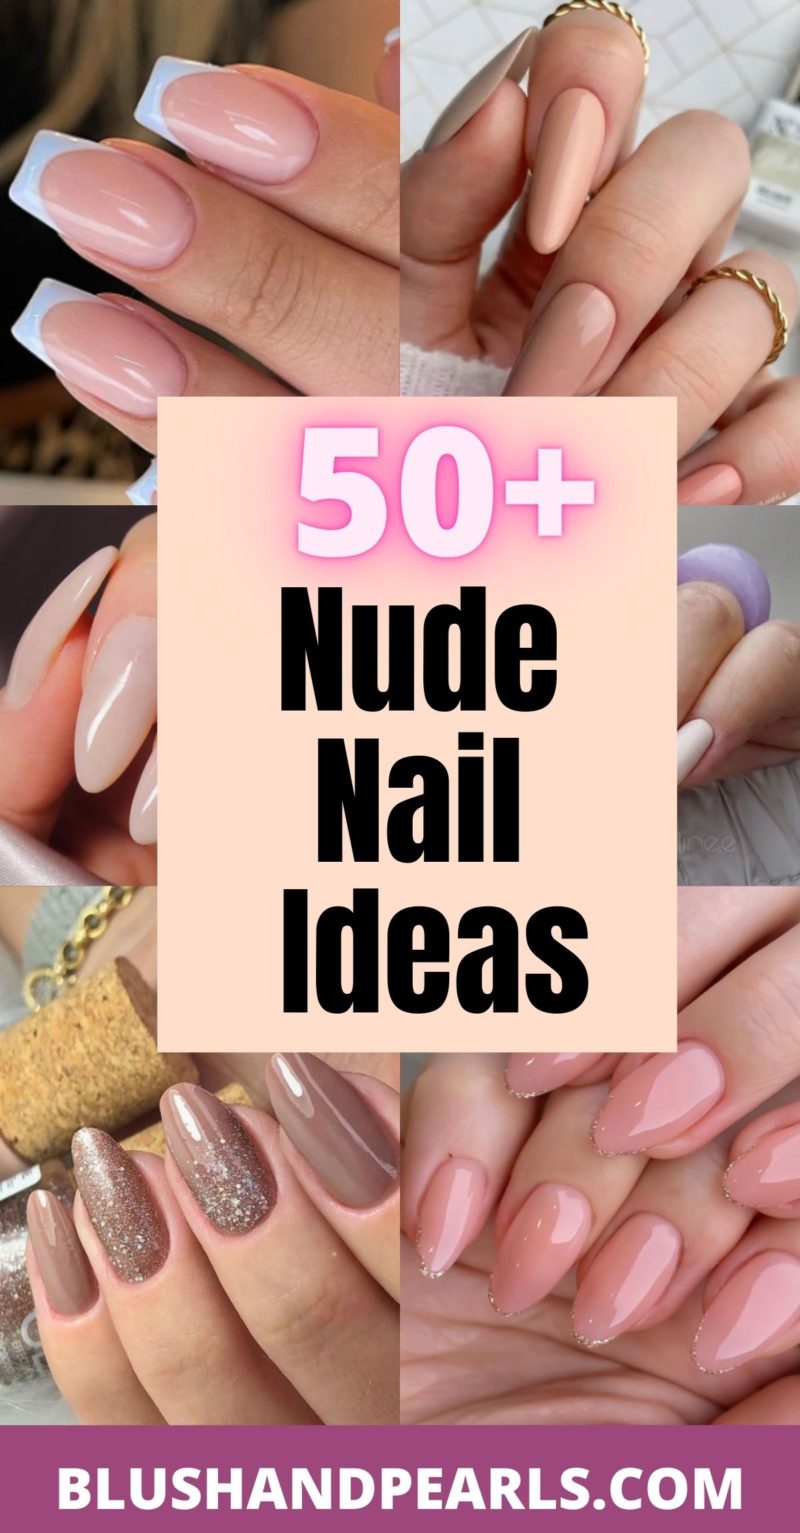 nude nail ideas. nude nail trends simple. classic nude nails